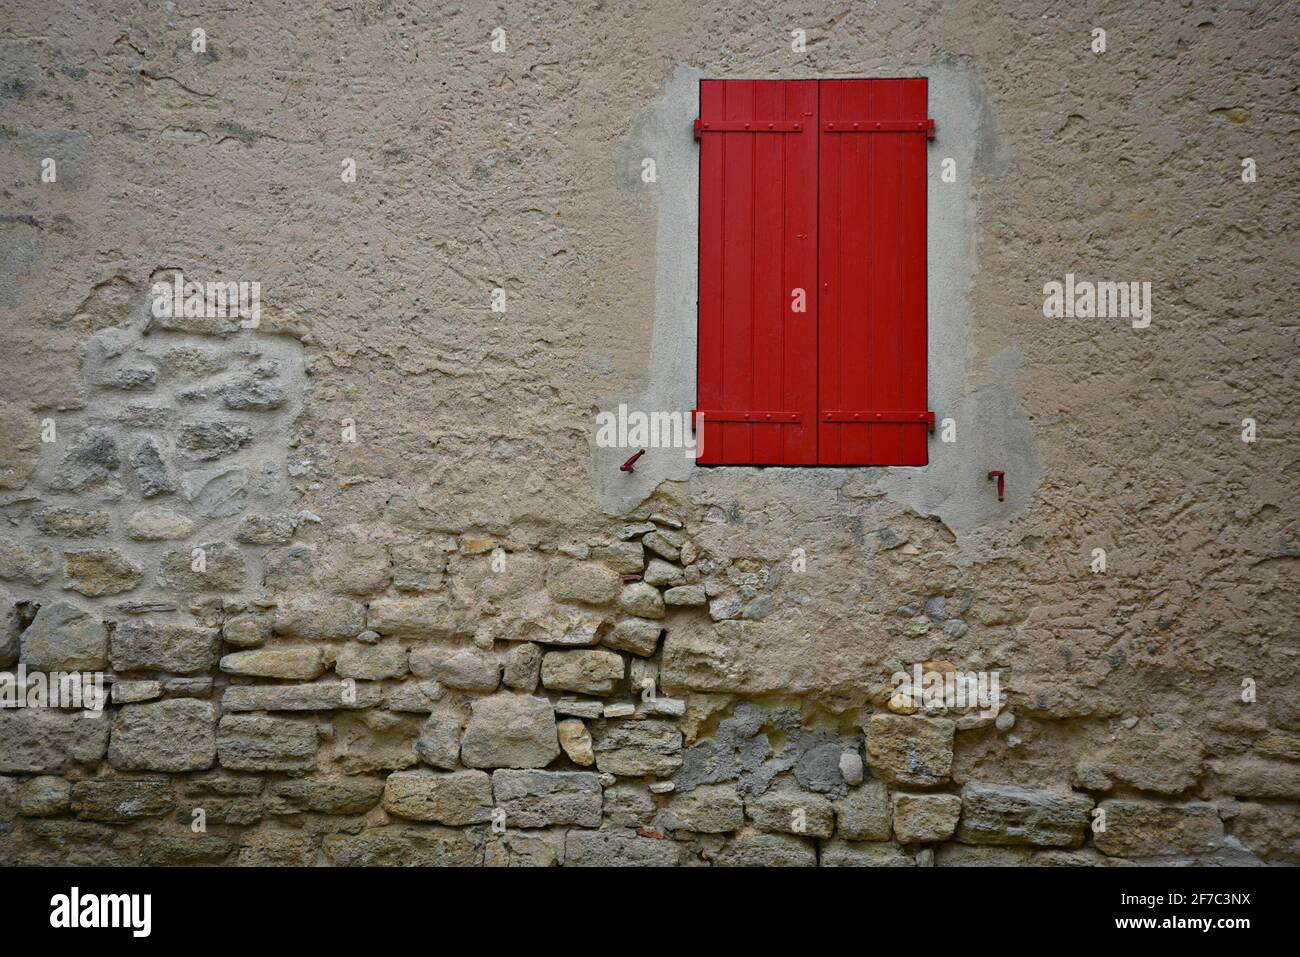 Rural Provençal style house stone facade with a red wooden window  in the picturesque village of Grambois, Provence-Alpes-Côte d'Azur, Vaucluse France Stock Photo